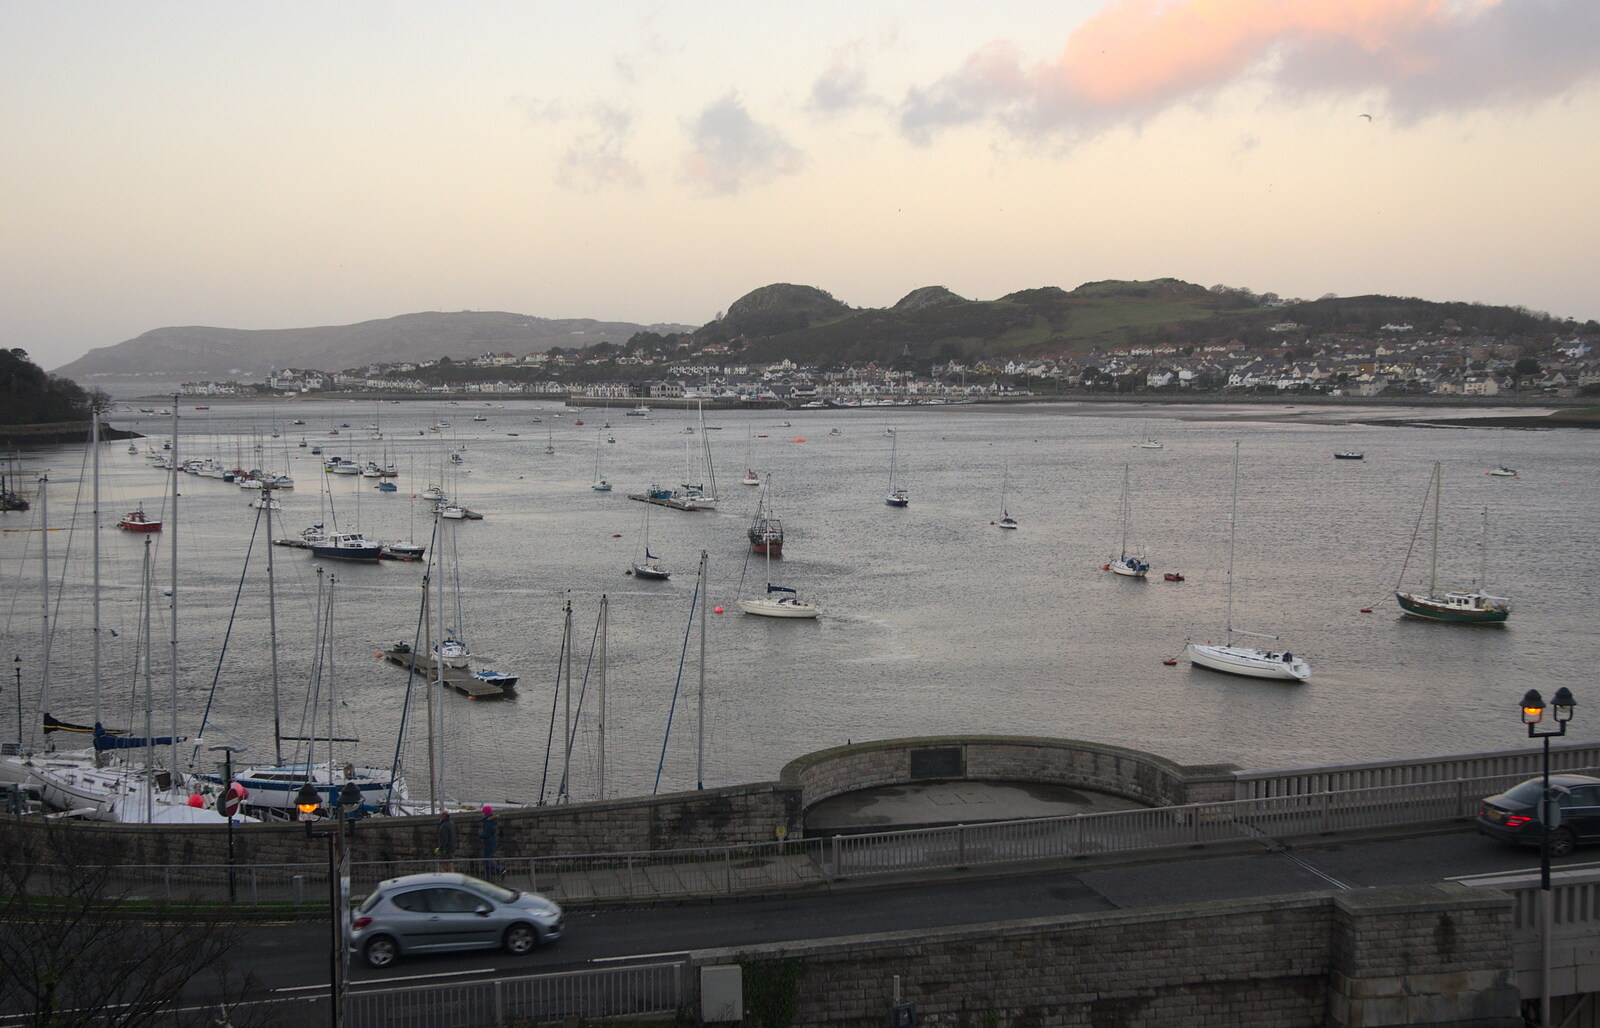 Boats on the river from Conwy, Holyhead and the Ferry to Ireland - 21st December 2015